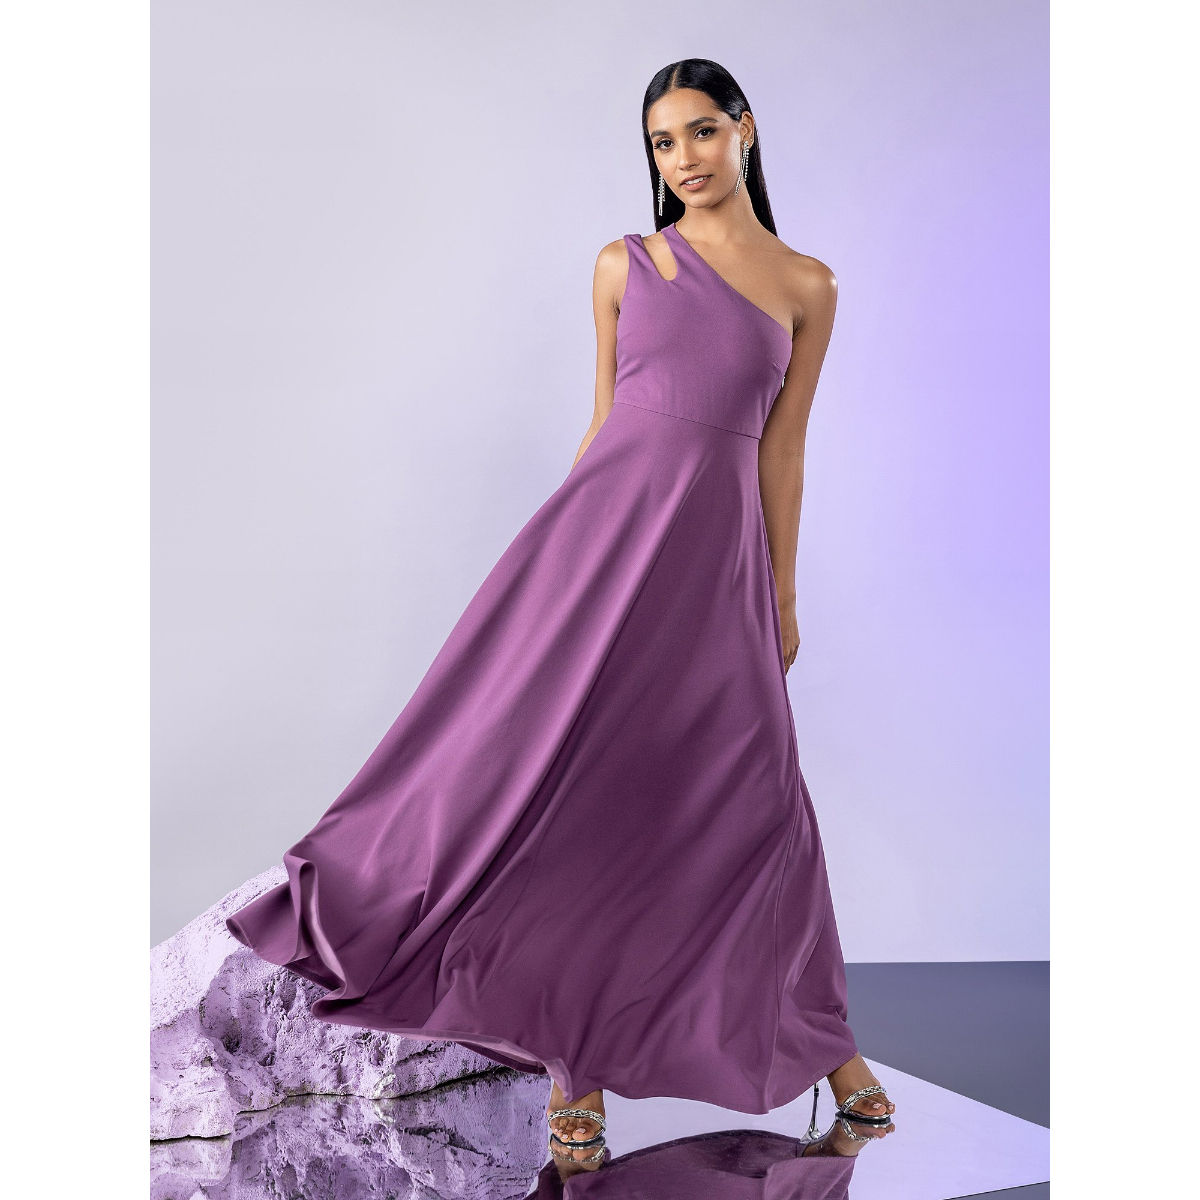 Twenty Dresses By Nykaa Fashion Ready For The Royal Ball Maxi Dress Buy  Twenty Dresses By Nykaa Fashion Ready For The Royal Ball Maxi Dress Online  at Best Price in India 